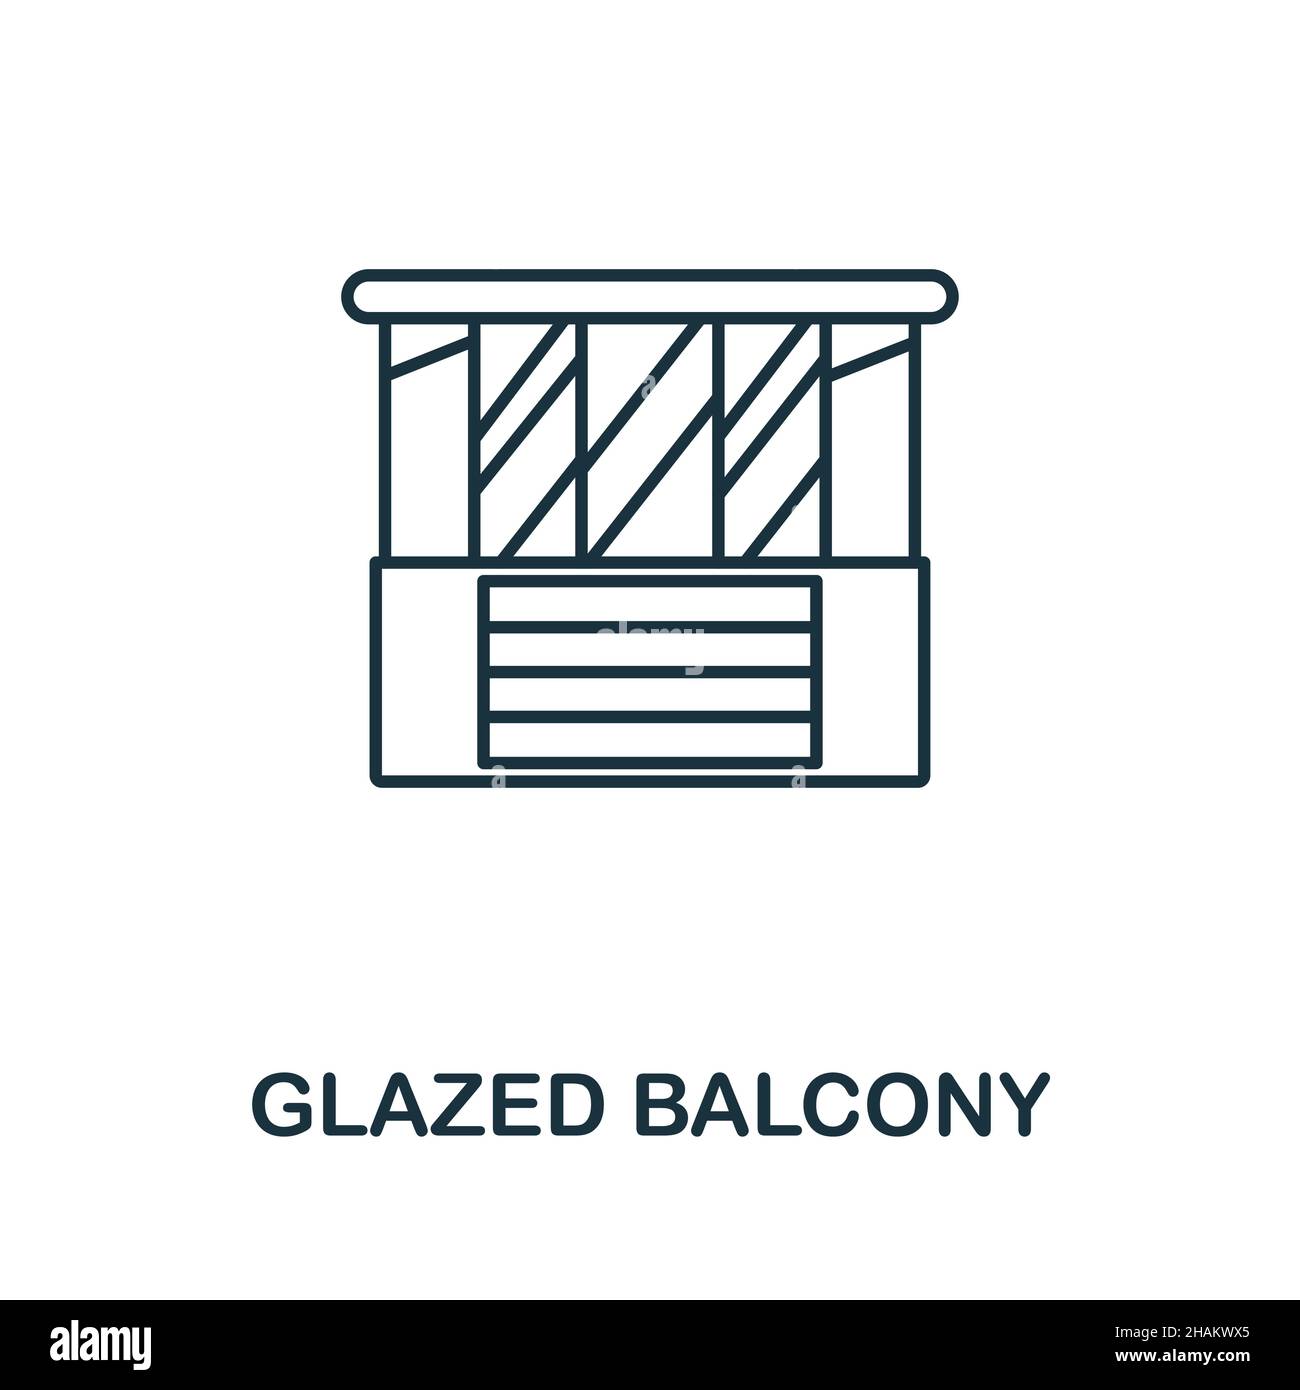 Glazed Balcony icon. Line element from balcony collection. Linear Glazed Balcony icon sign for web design, infographics and more. Stock Vector